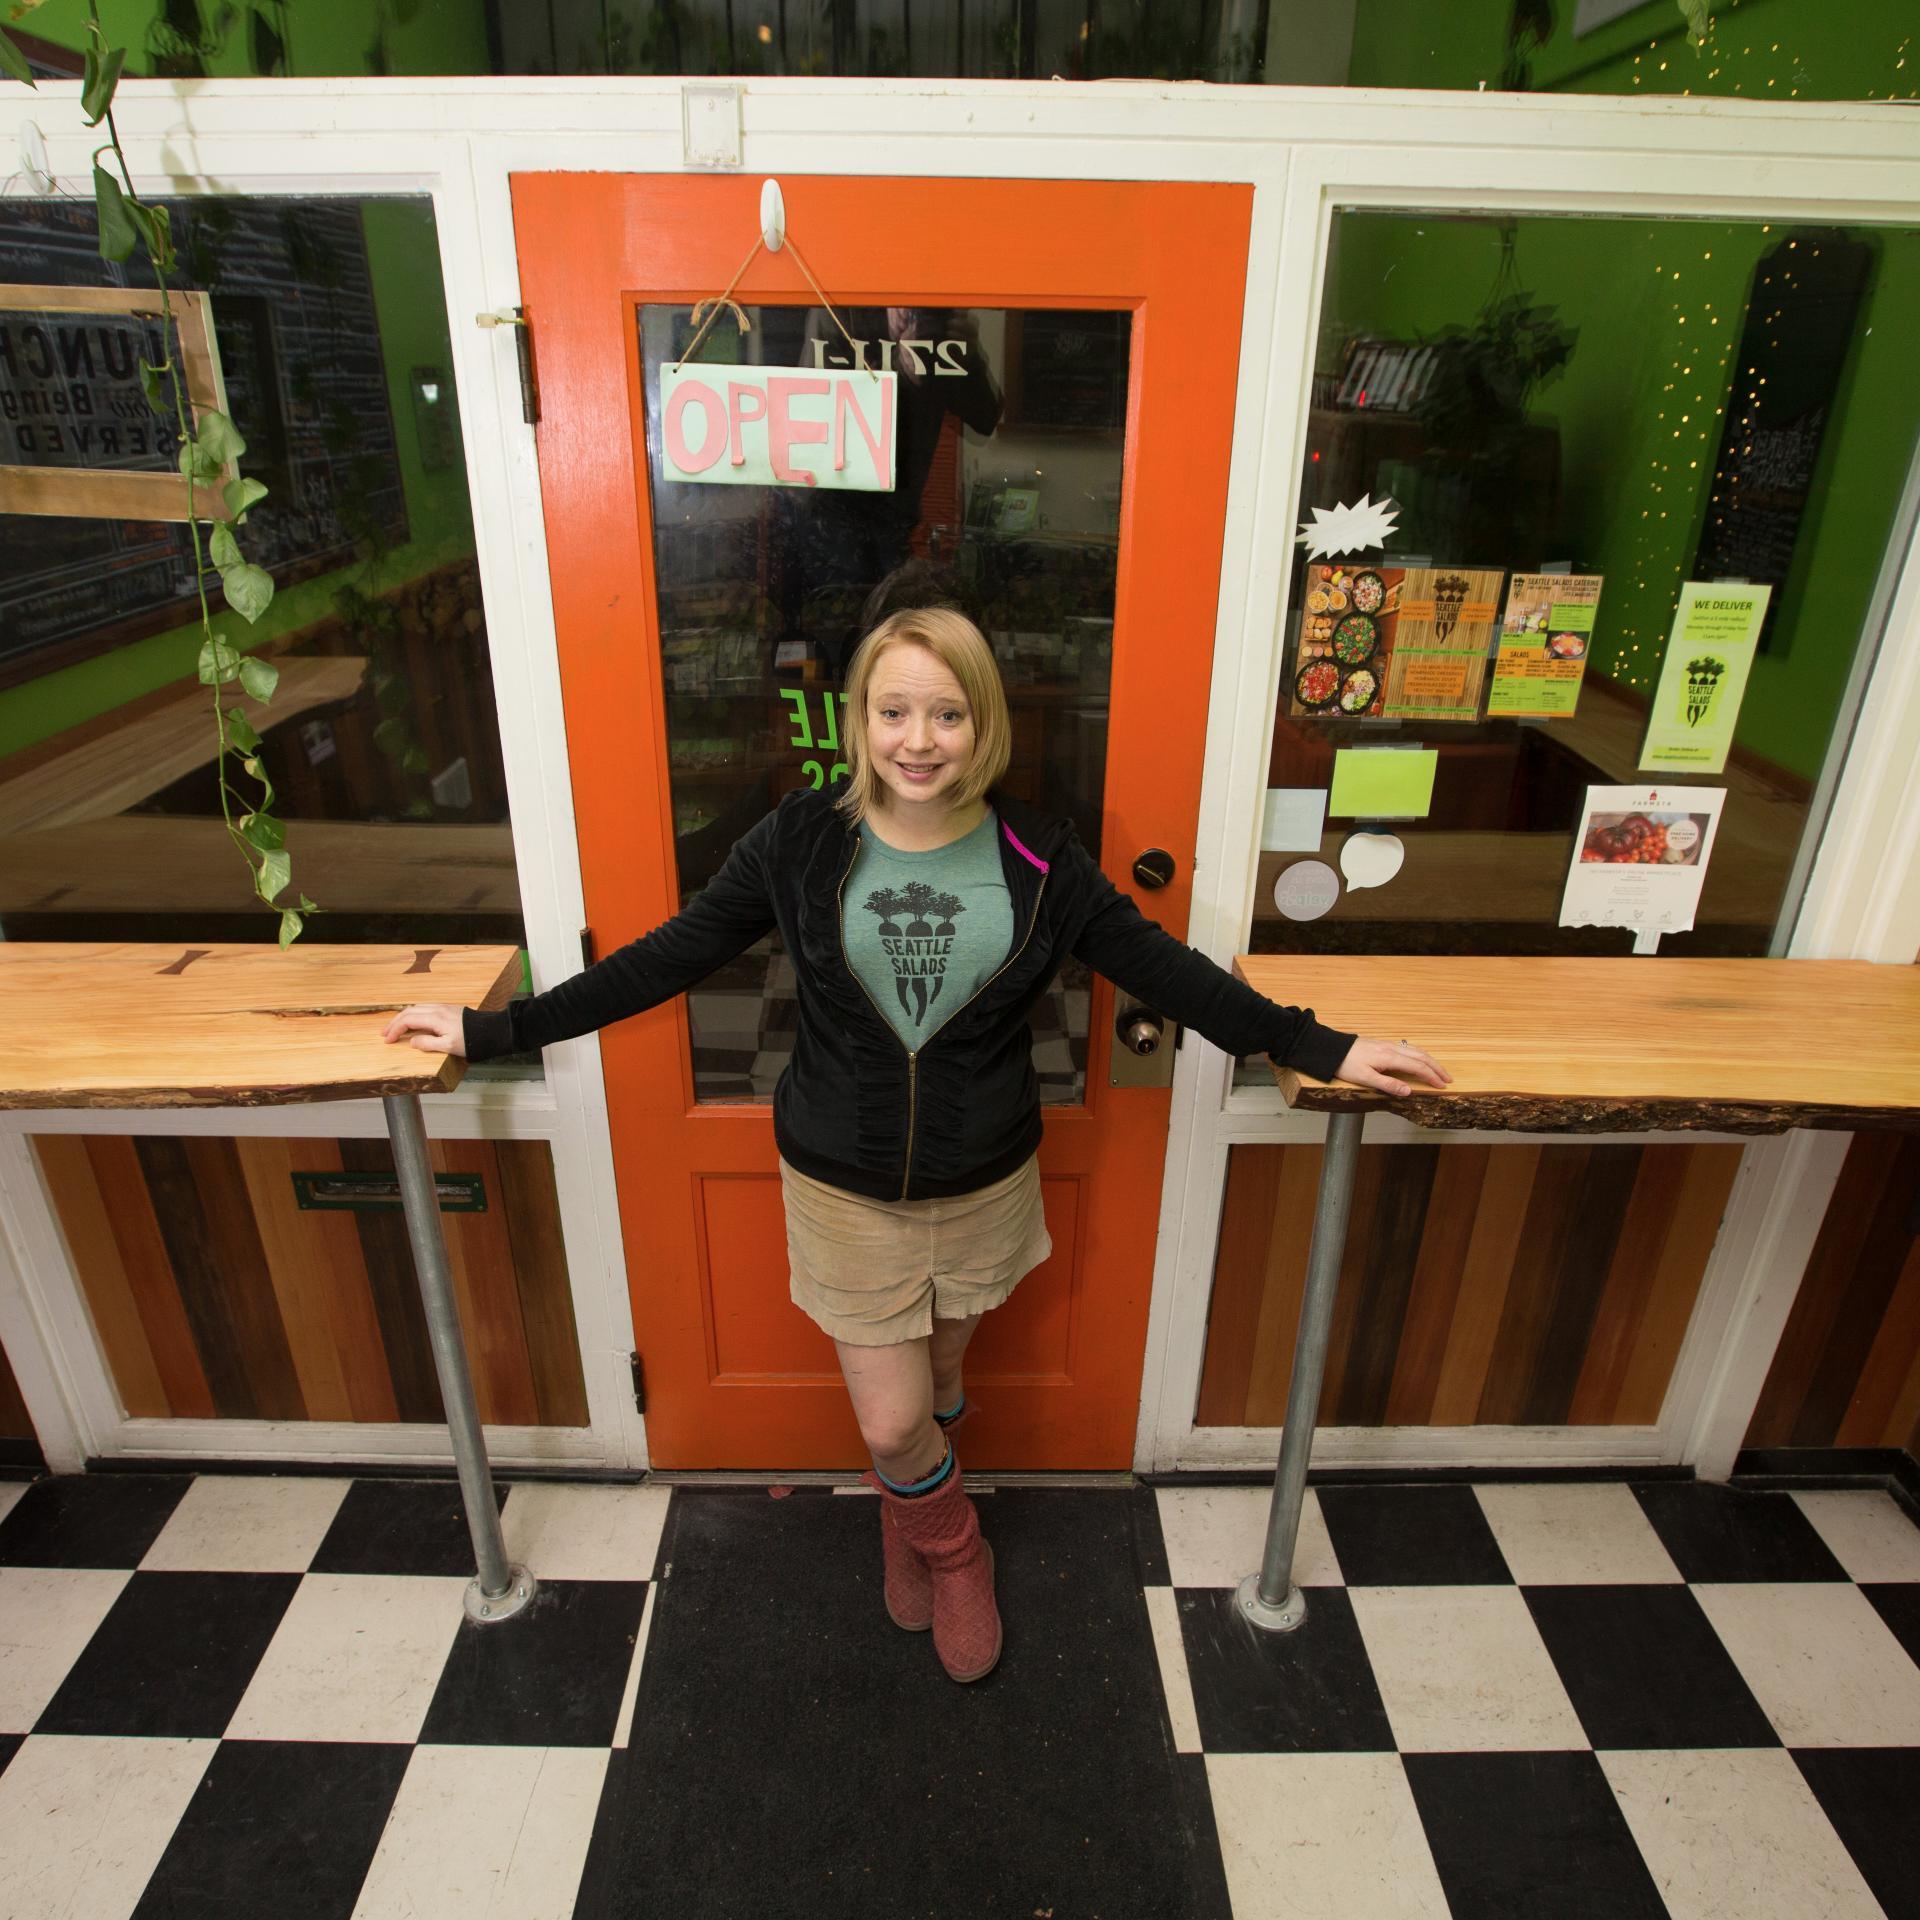 #Wellness and #Health advocate. #Women #entrepreneur and founder of Seattle Salads!